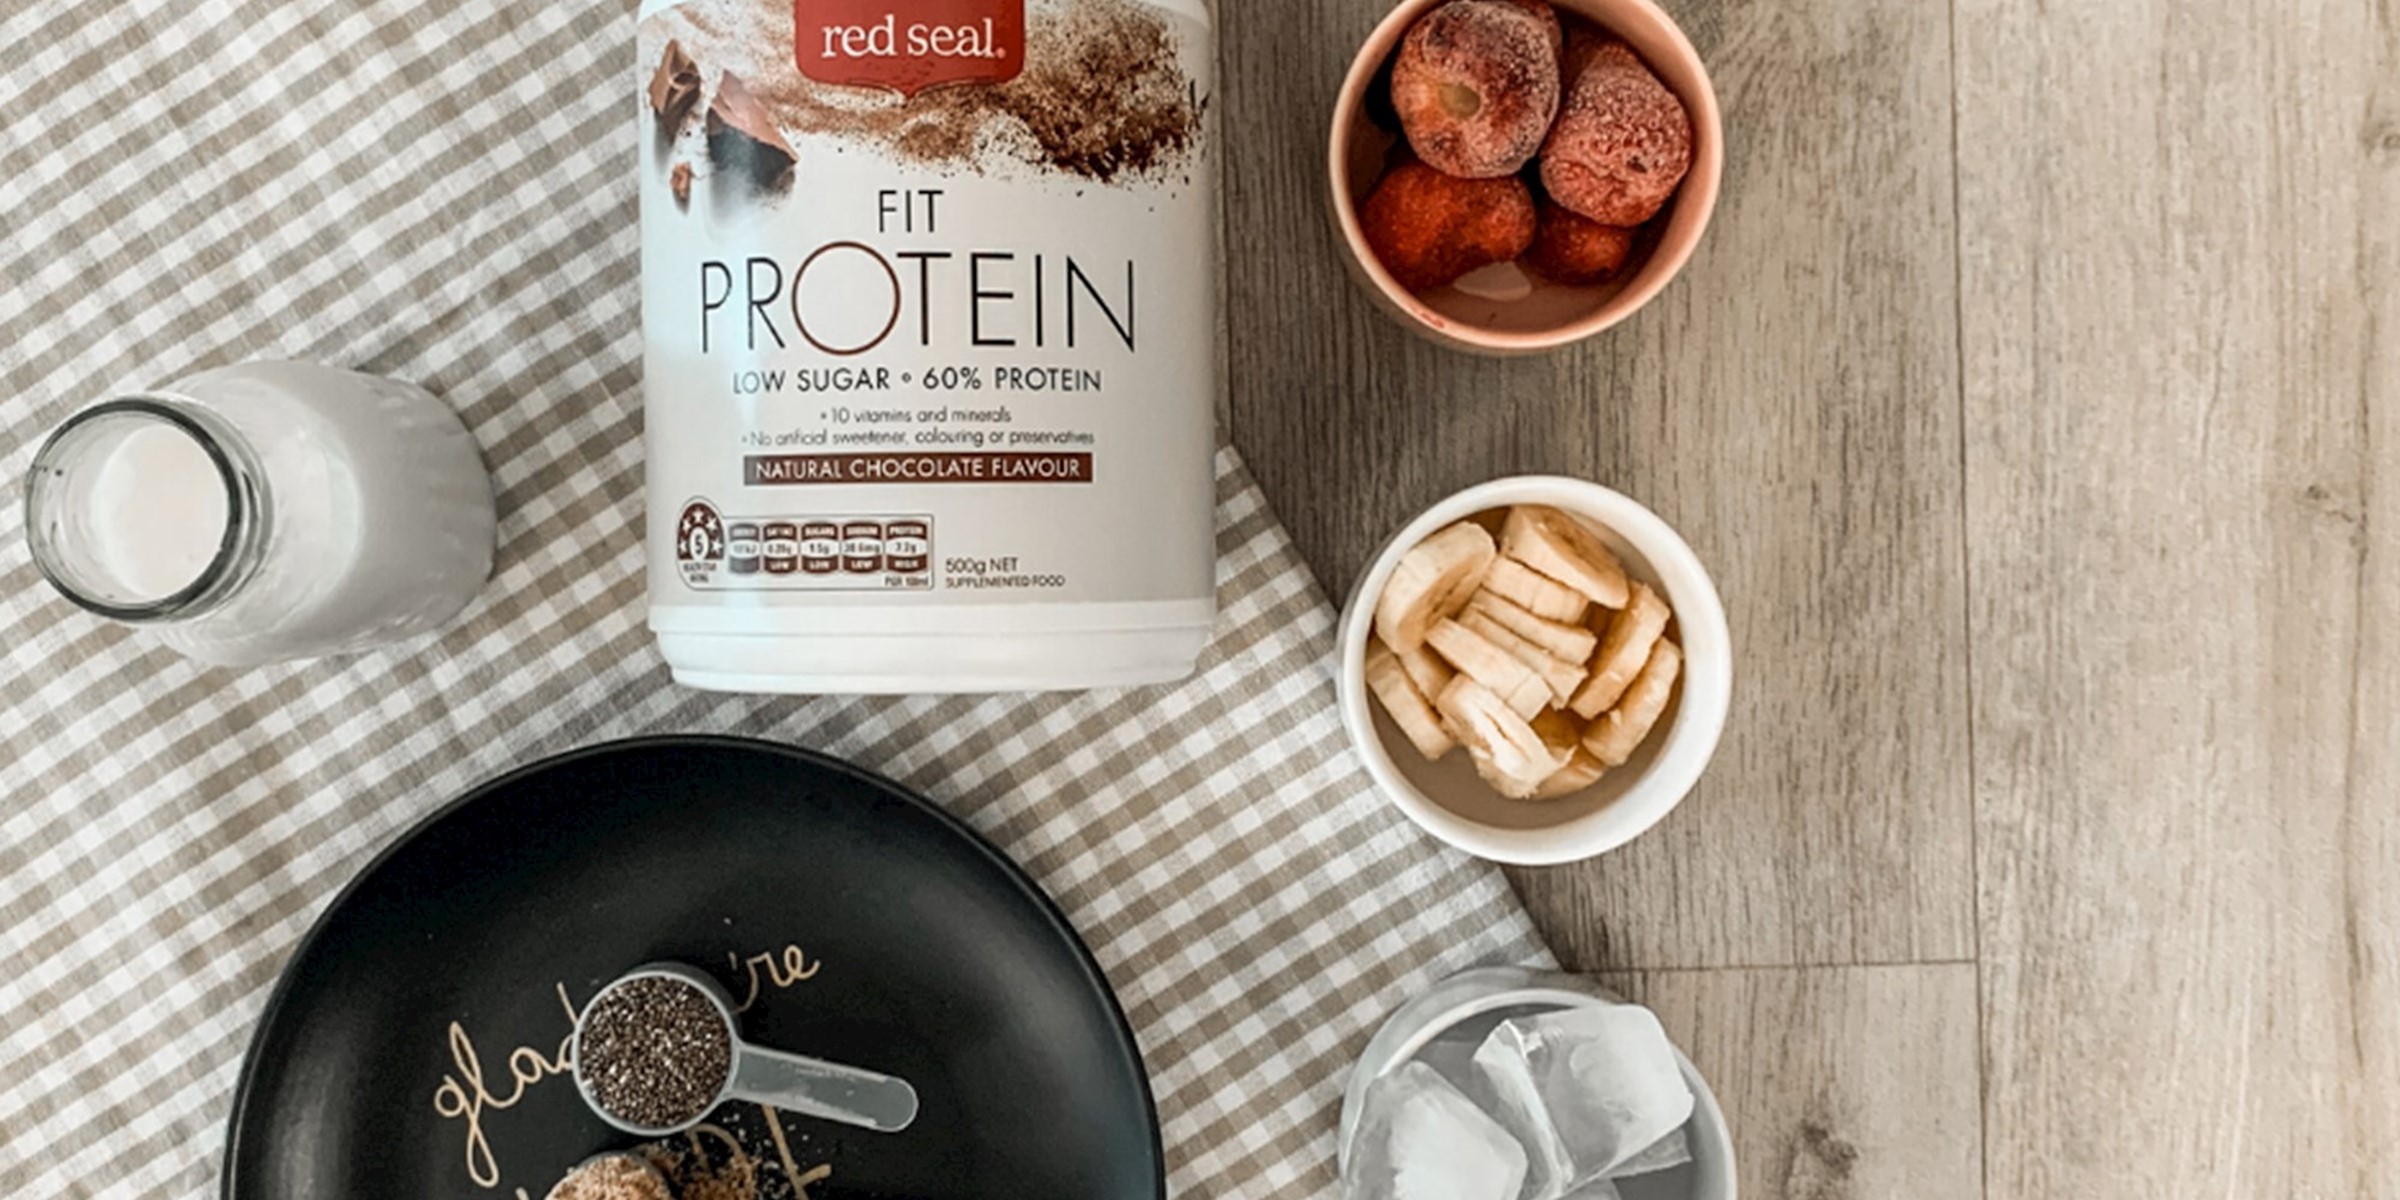 Red Seal FIT Protein Chocolate Flavour